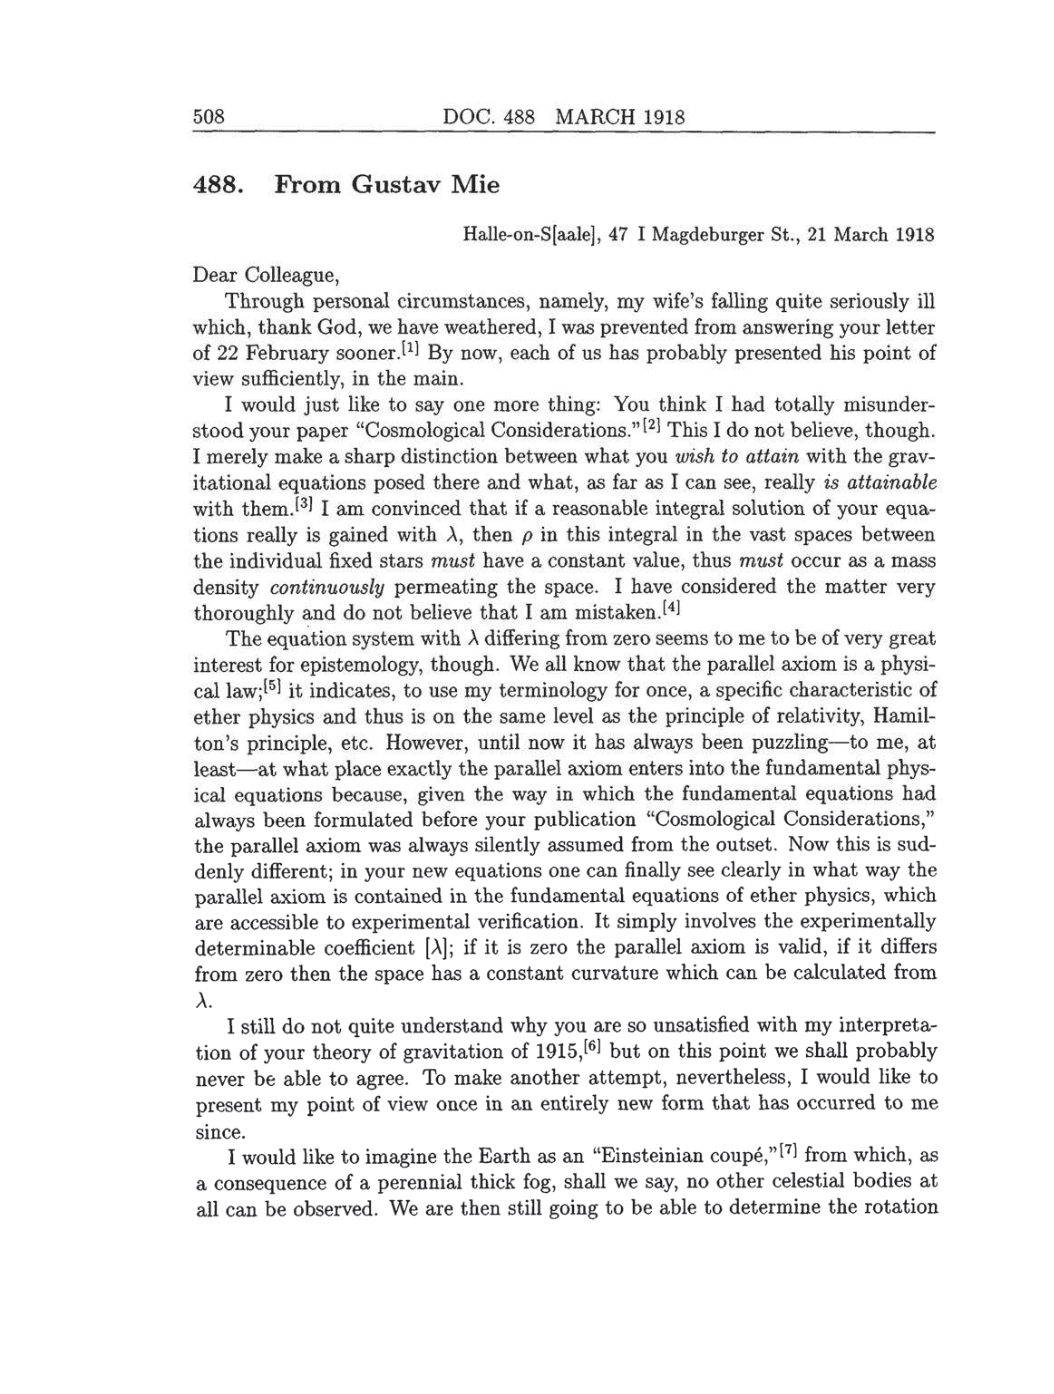 Volume 8: The Berlin Years: Correspondence, 1914-1918 (English translation supplement) page 508